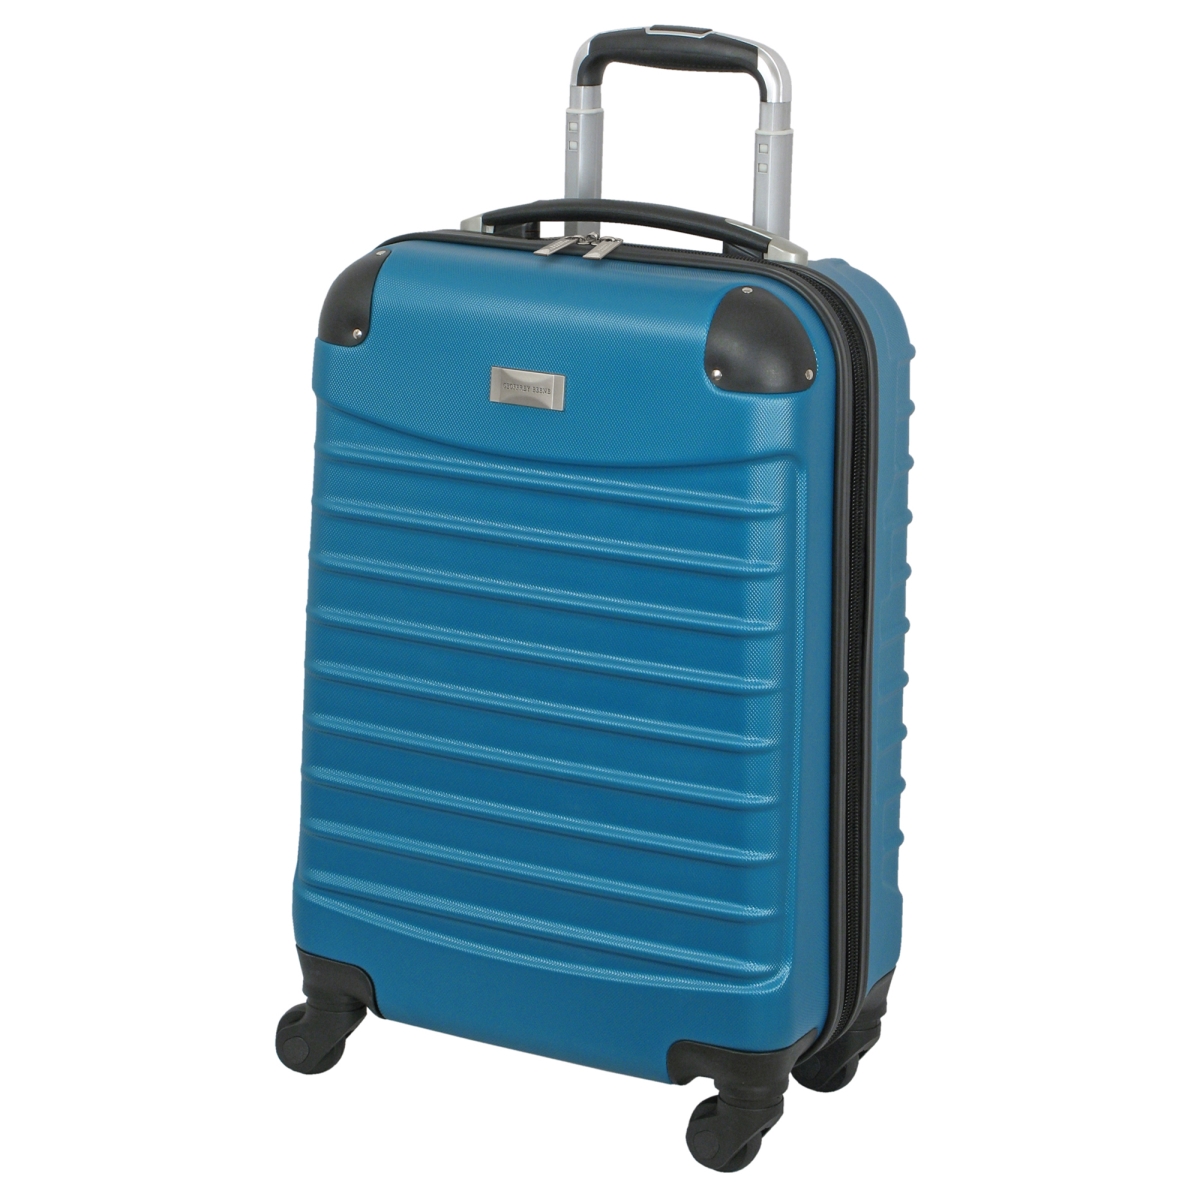 Gb2760-20 20 In. Hardside Vertical Luggage Set - Teal, One Size